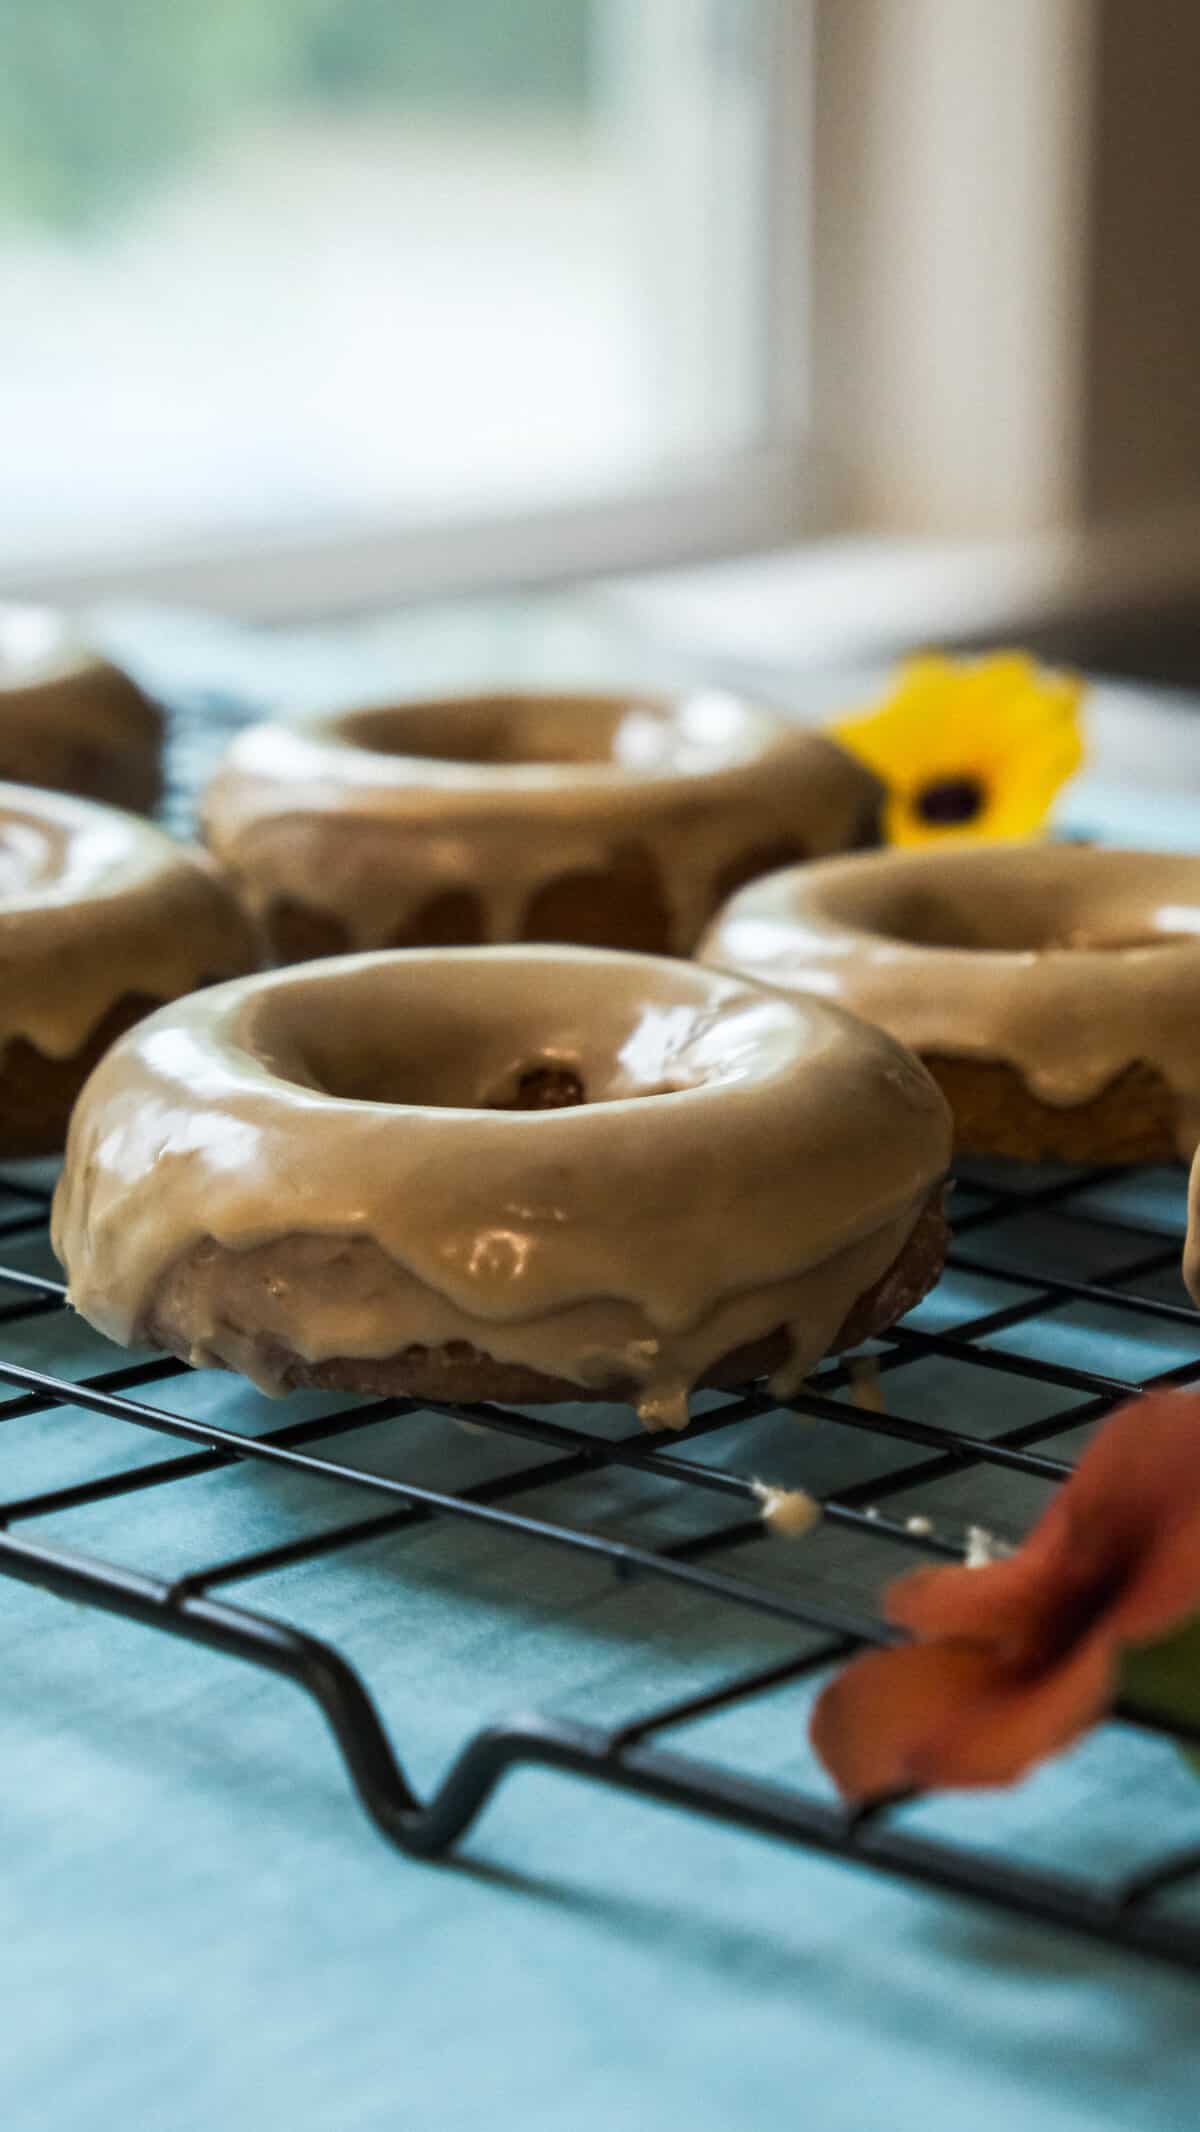 Maple icing recipe for donuts